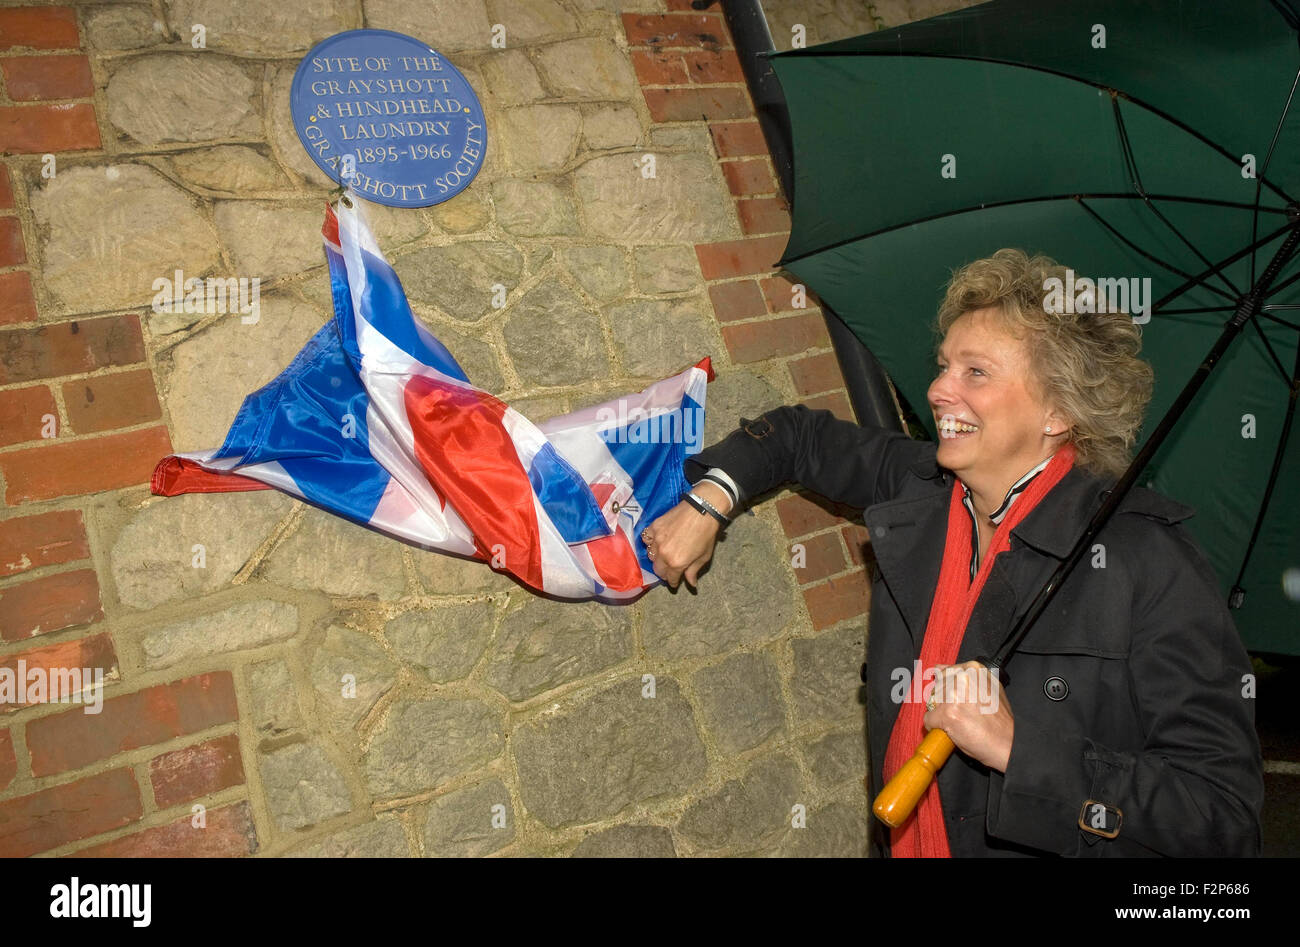 Chairperson of the Grayshott Society unveiling the Blue Plaque at the site of former Grayshott & Hindhead Laundry (1895-1966)... Stock Photo